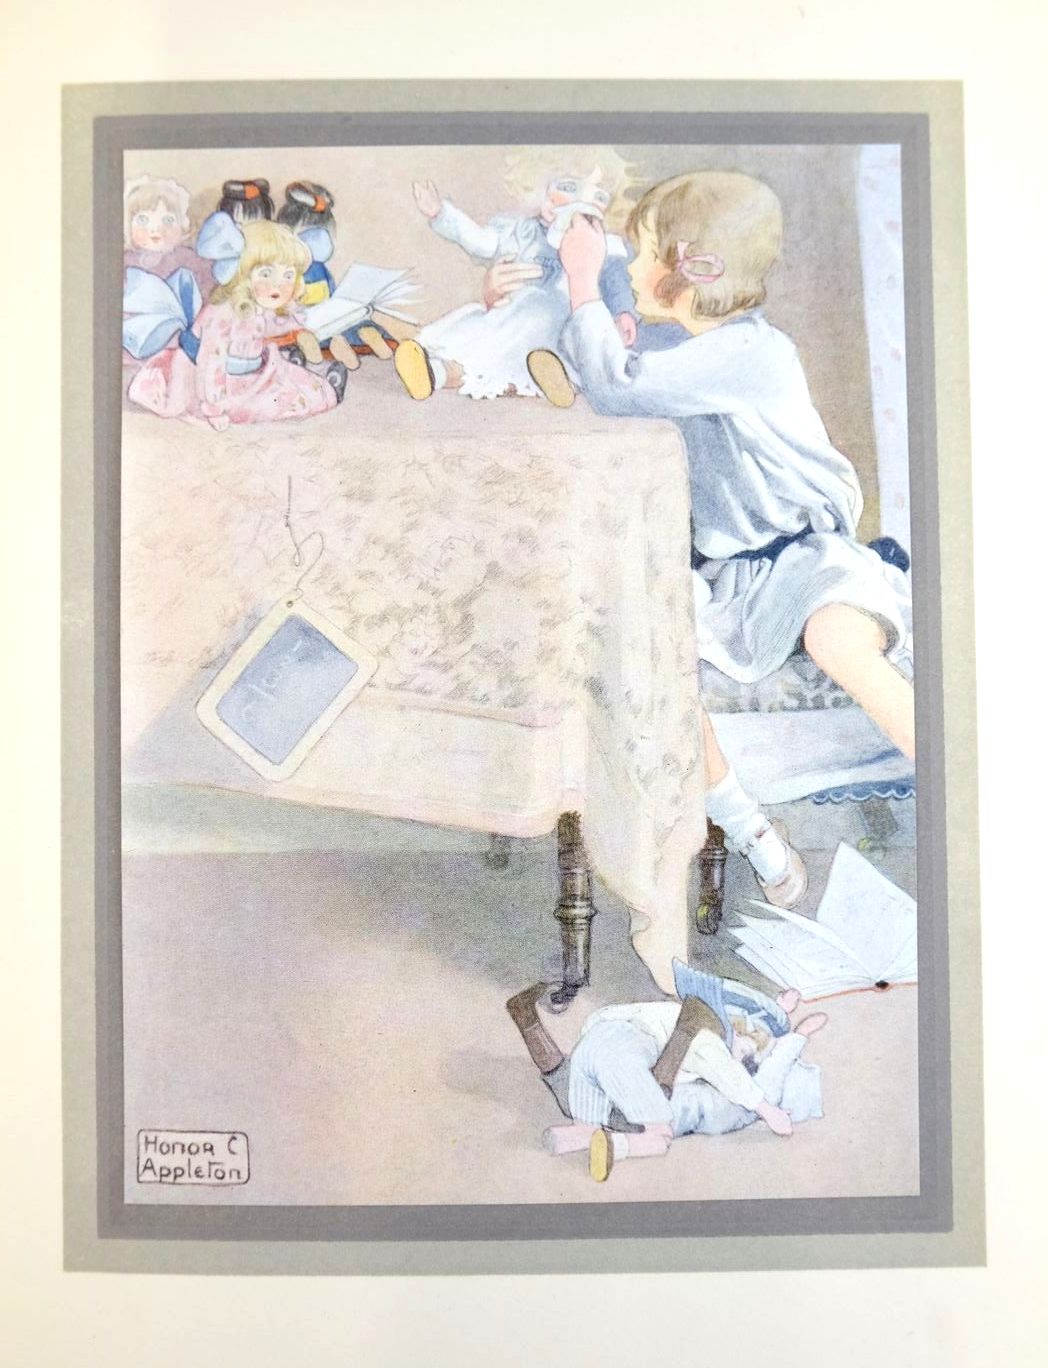 Photo of JOSEPHINE AND HER DOLLS written by Cradock, Mrs. H.C. illustrated by Appleton, Honor C. published by Blackie & Son Ltd. (STOCK CODE: 1325064)  for sale by Stella & Rose's Books